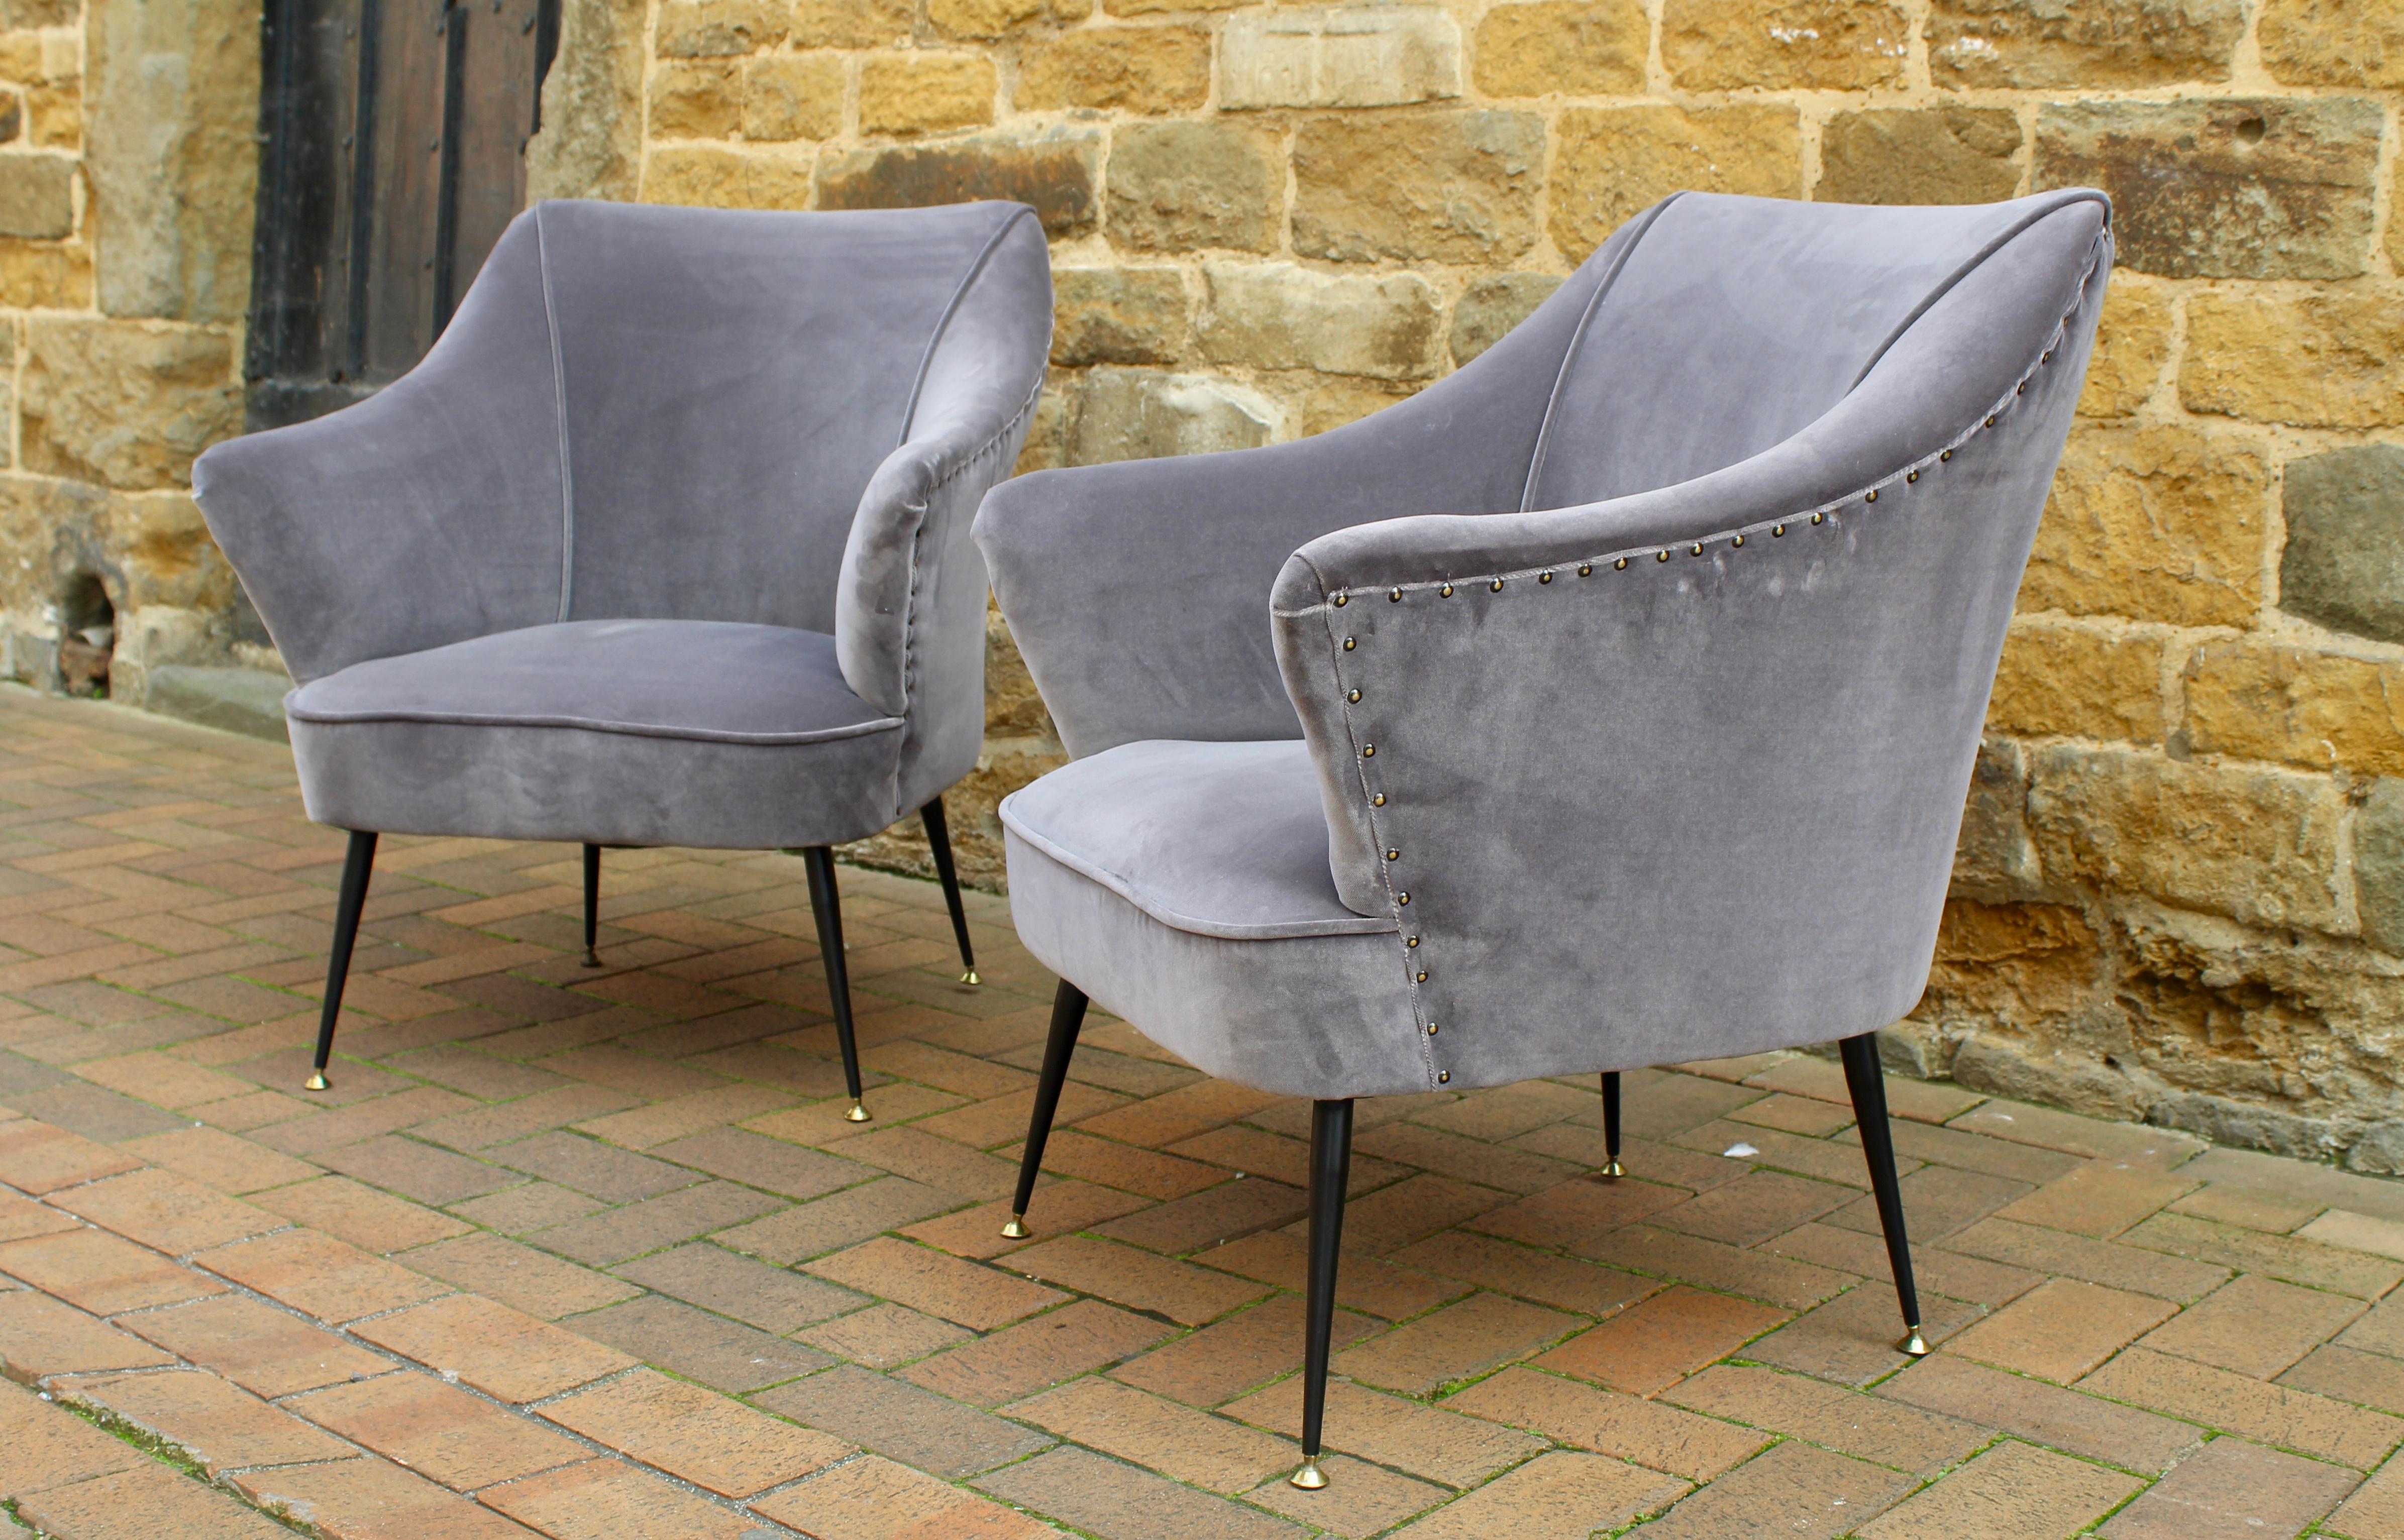 Beautiful pair of 1950s Italian armchairs attributed to Gio Ponti which have been recently reupholstered in a high quality grey velvet. These chairs sit on tall thin black steel legs with brass feet. 

Dimensions:
Height 80 cm
Seat height 40